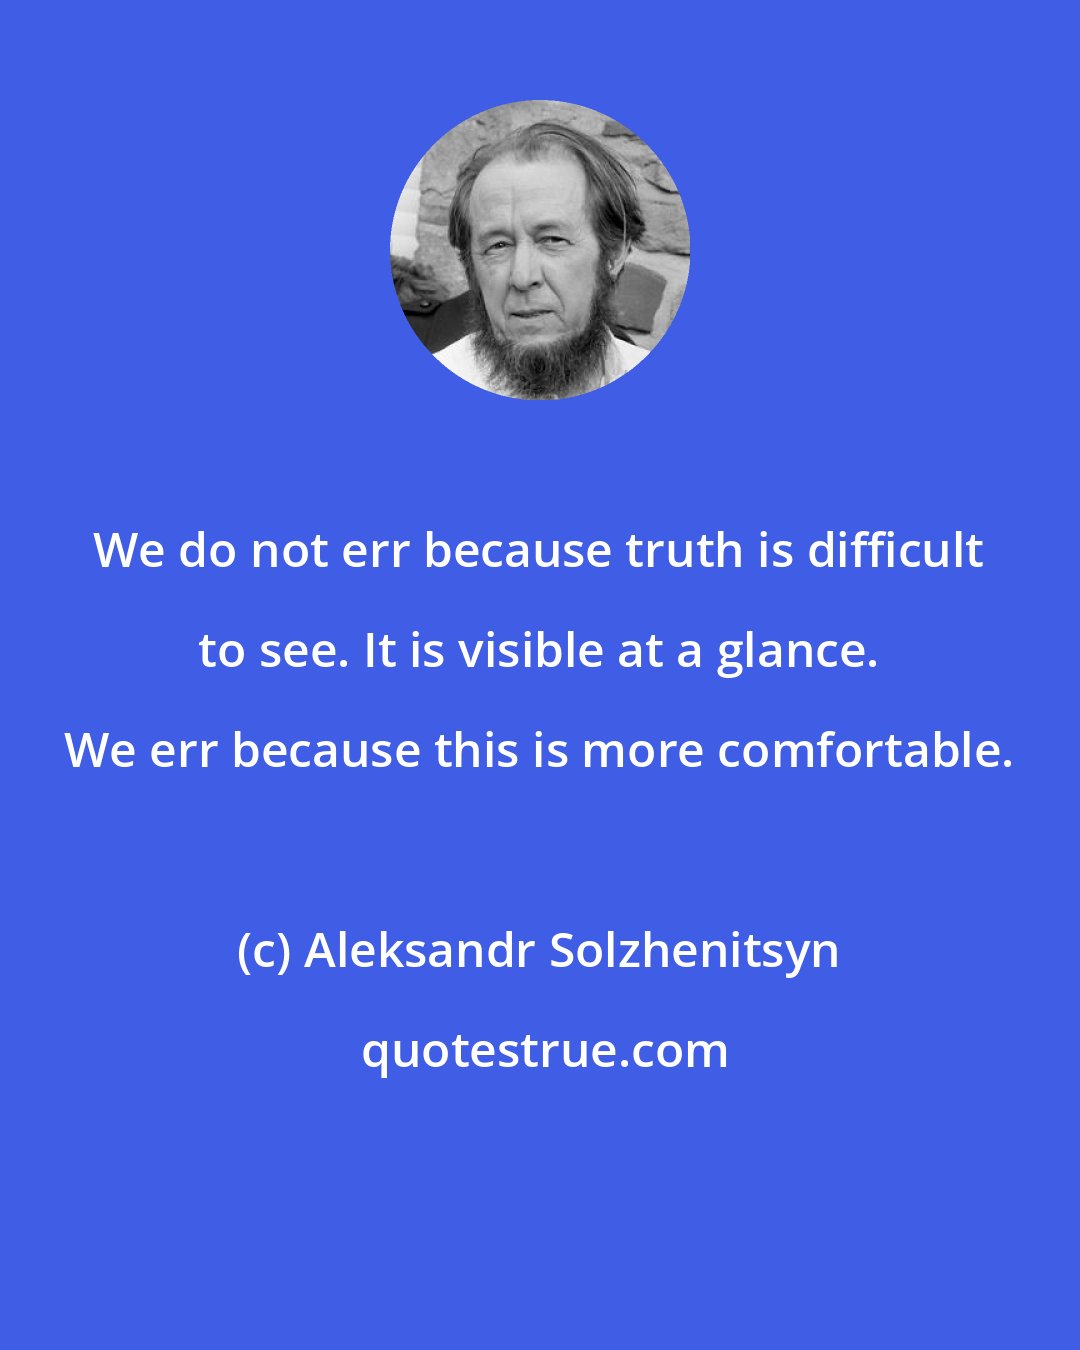 Aleksandr Solzhenitsyn: We do not err because truth is difficult to see. It is visible at a glance. We err because this is more comfortable.